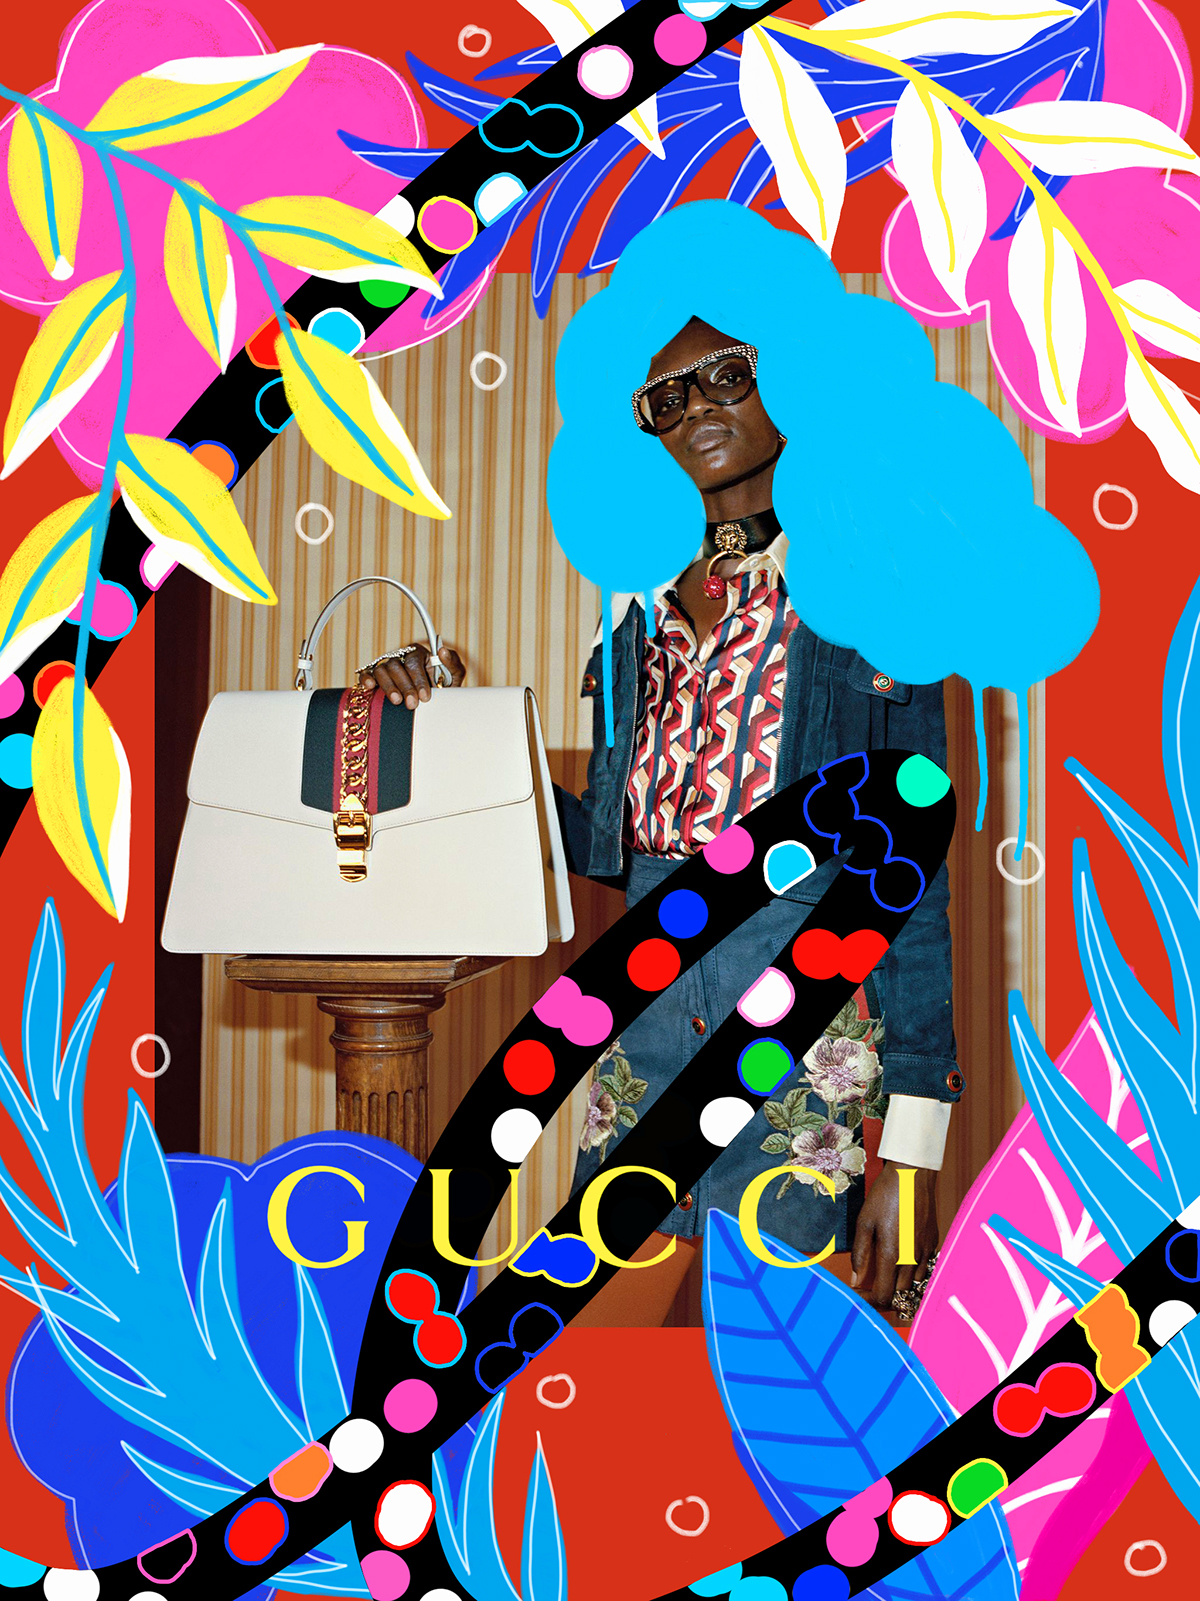 Gucci working site artwork on Behance